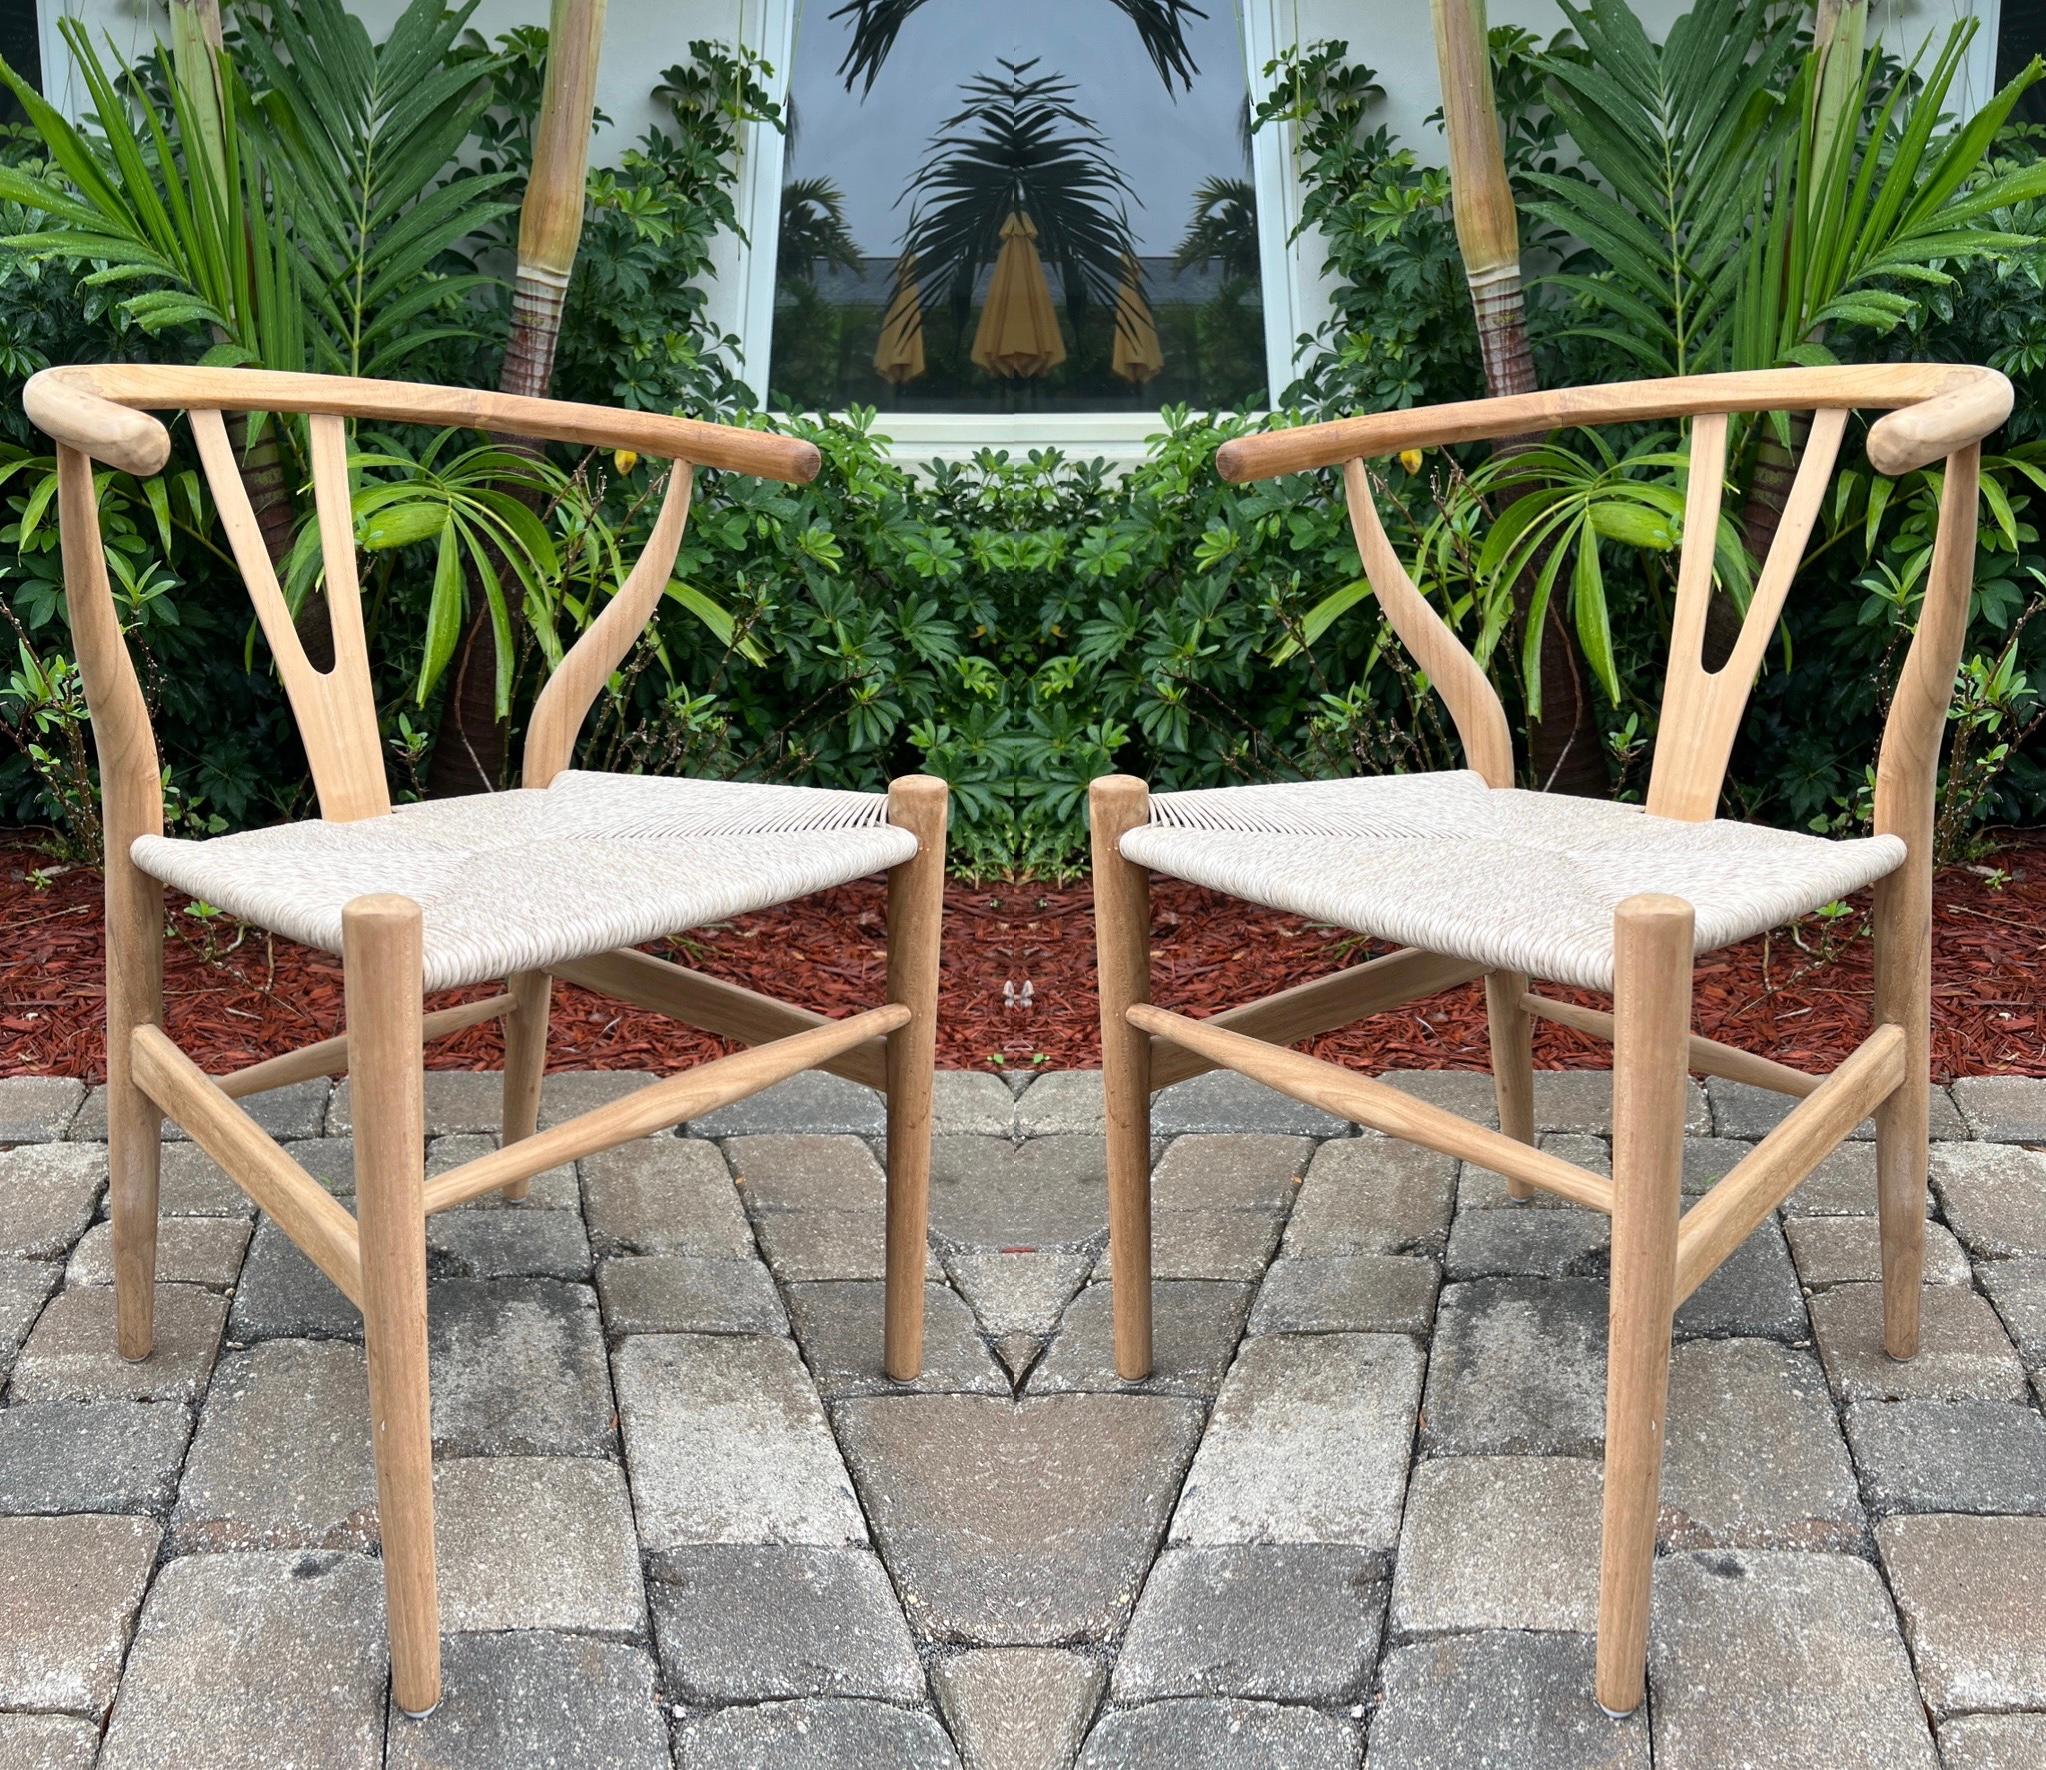 Danish Modern chairs in solid teak wood with a natural finish. Handcrafted curved frames feature a rounded top with Y-back design. The handwoven cord seats add to its organic beauty. Classic and timeless design makes these great accent chairs or a